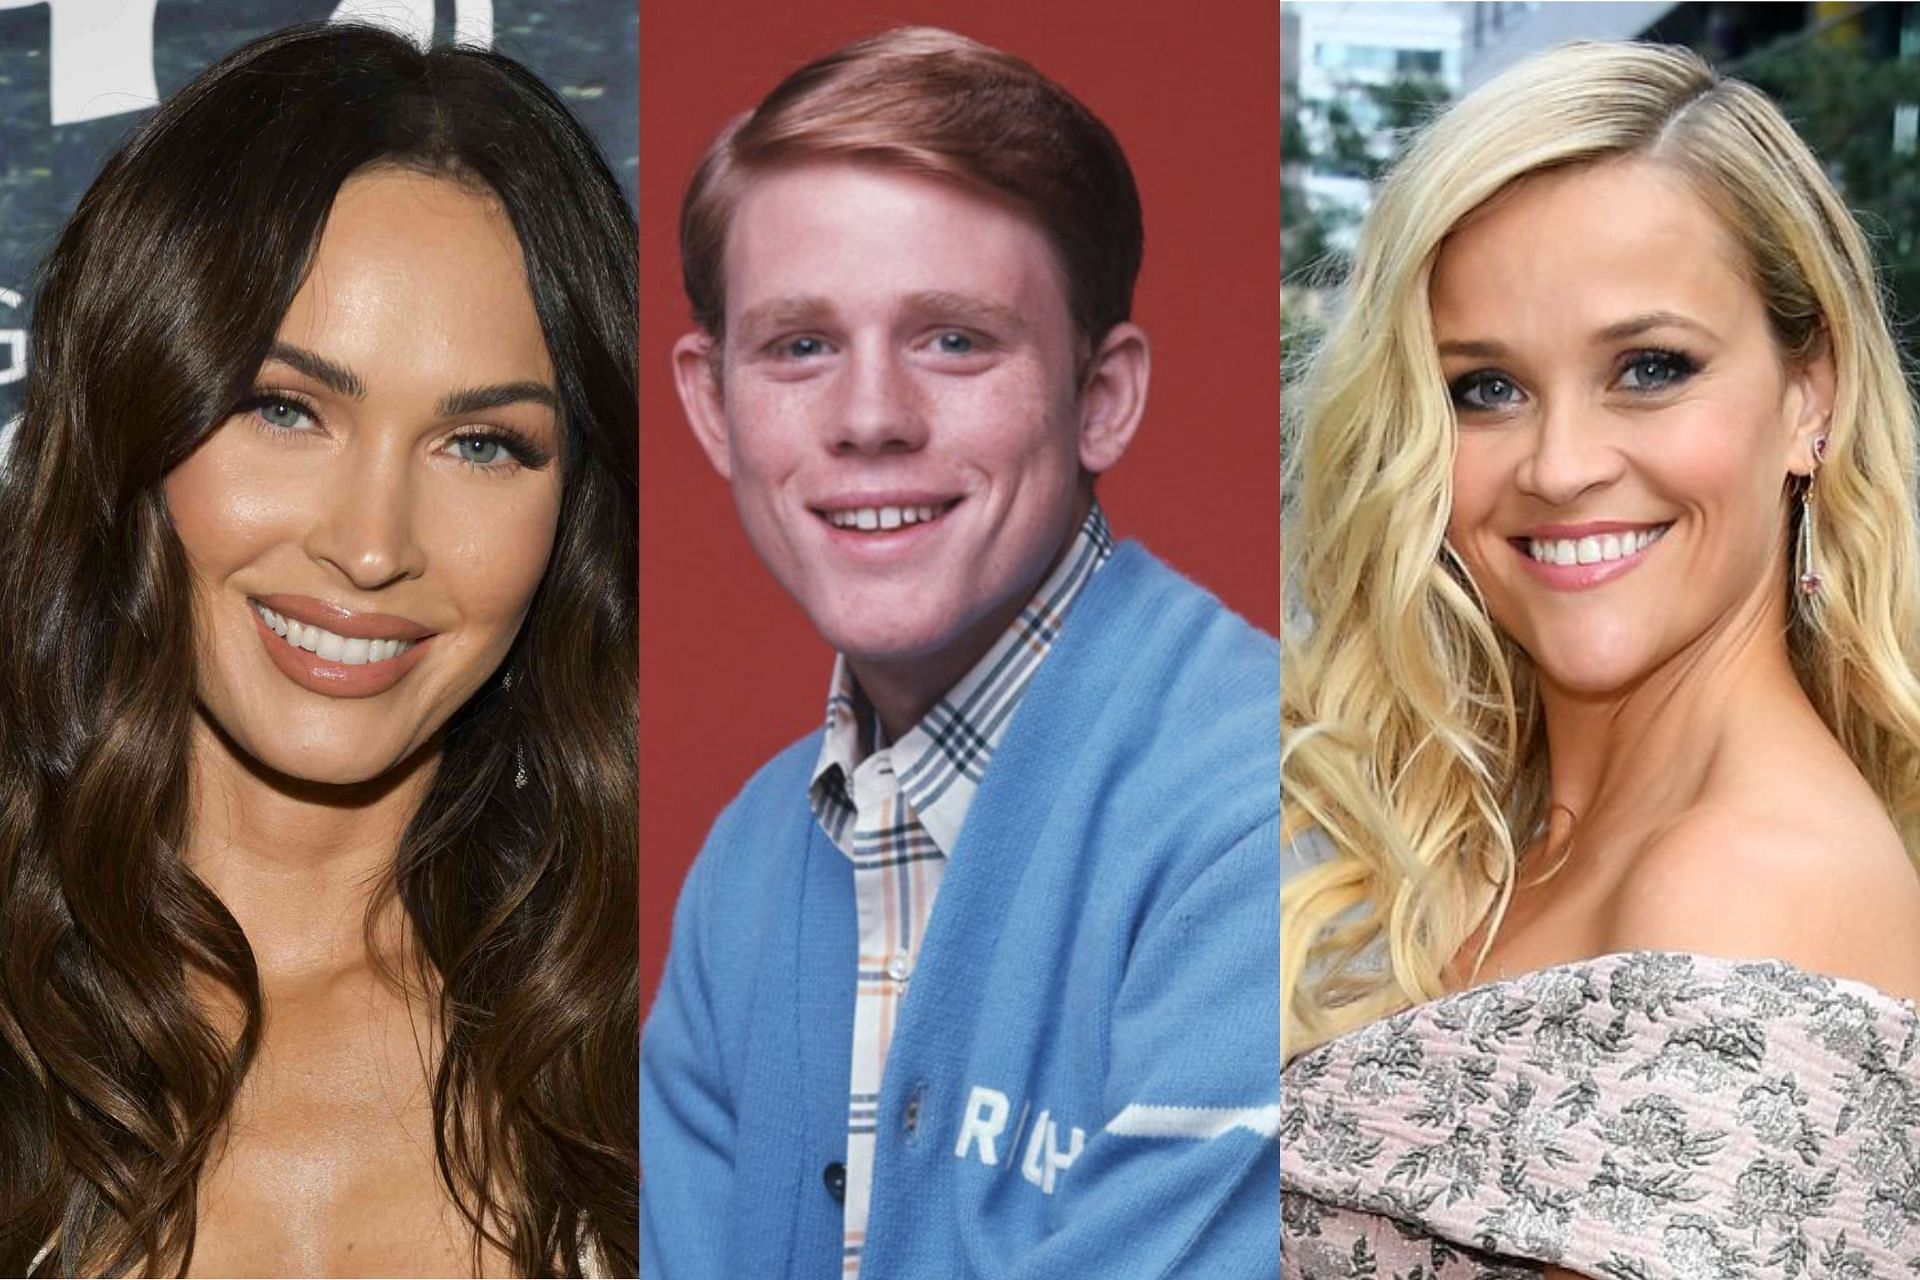 Megan Fox, Ron Howard as Richie Cunningham in Happy Days and Reese Witherspoon (Images via Getty/IMDB)